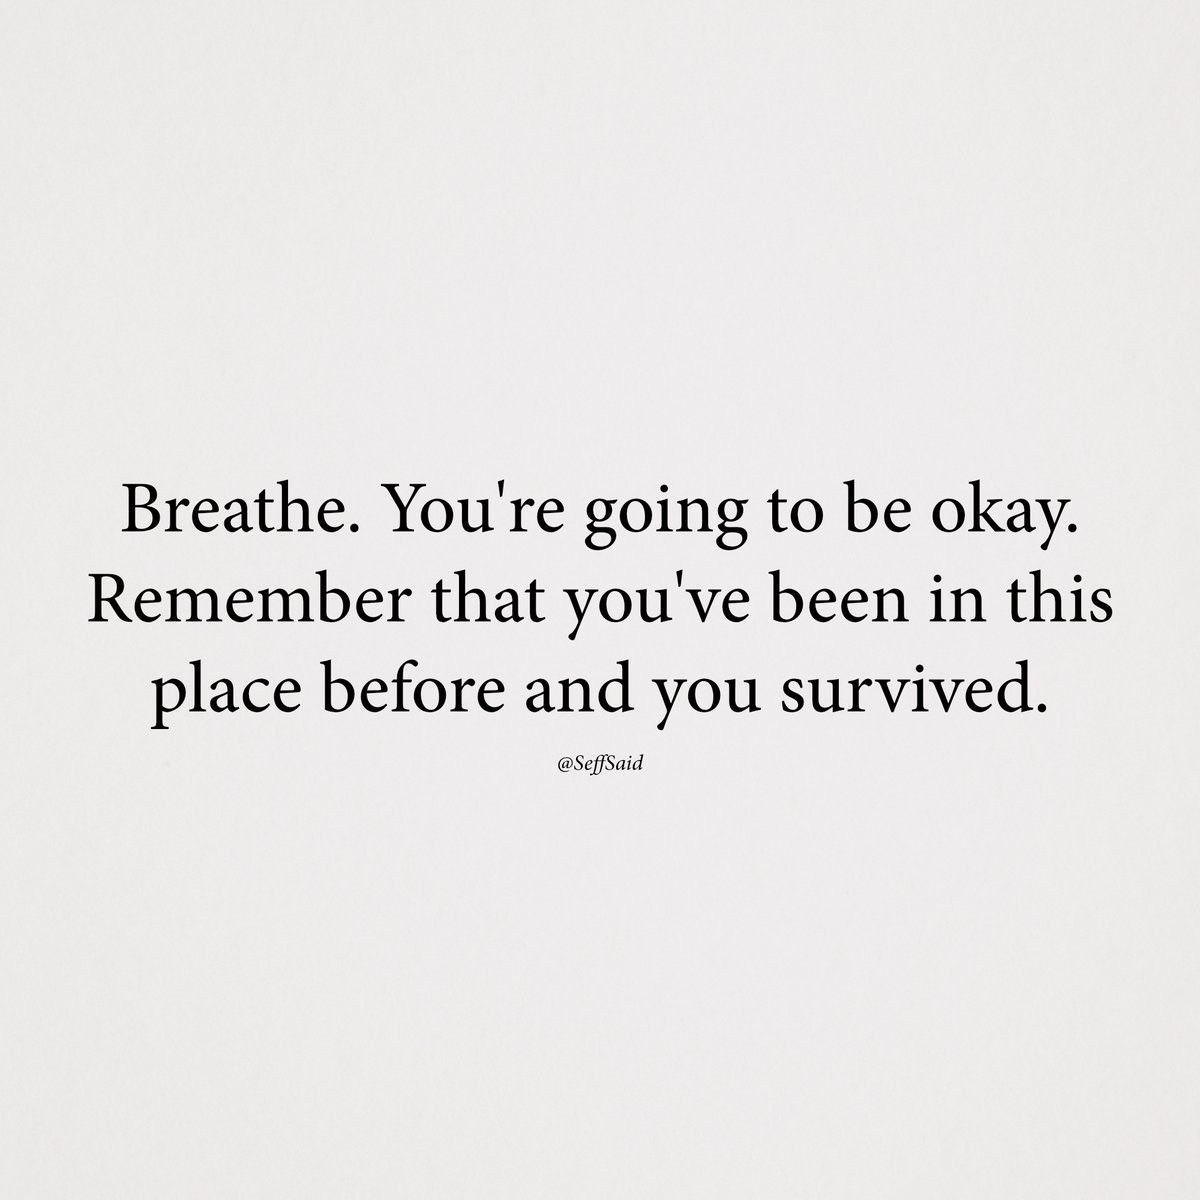 You're going to be ok